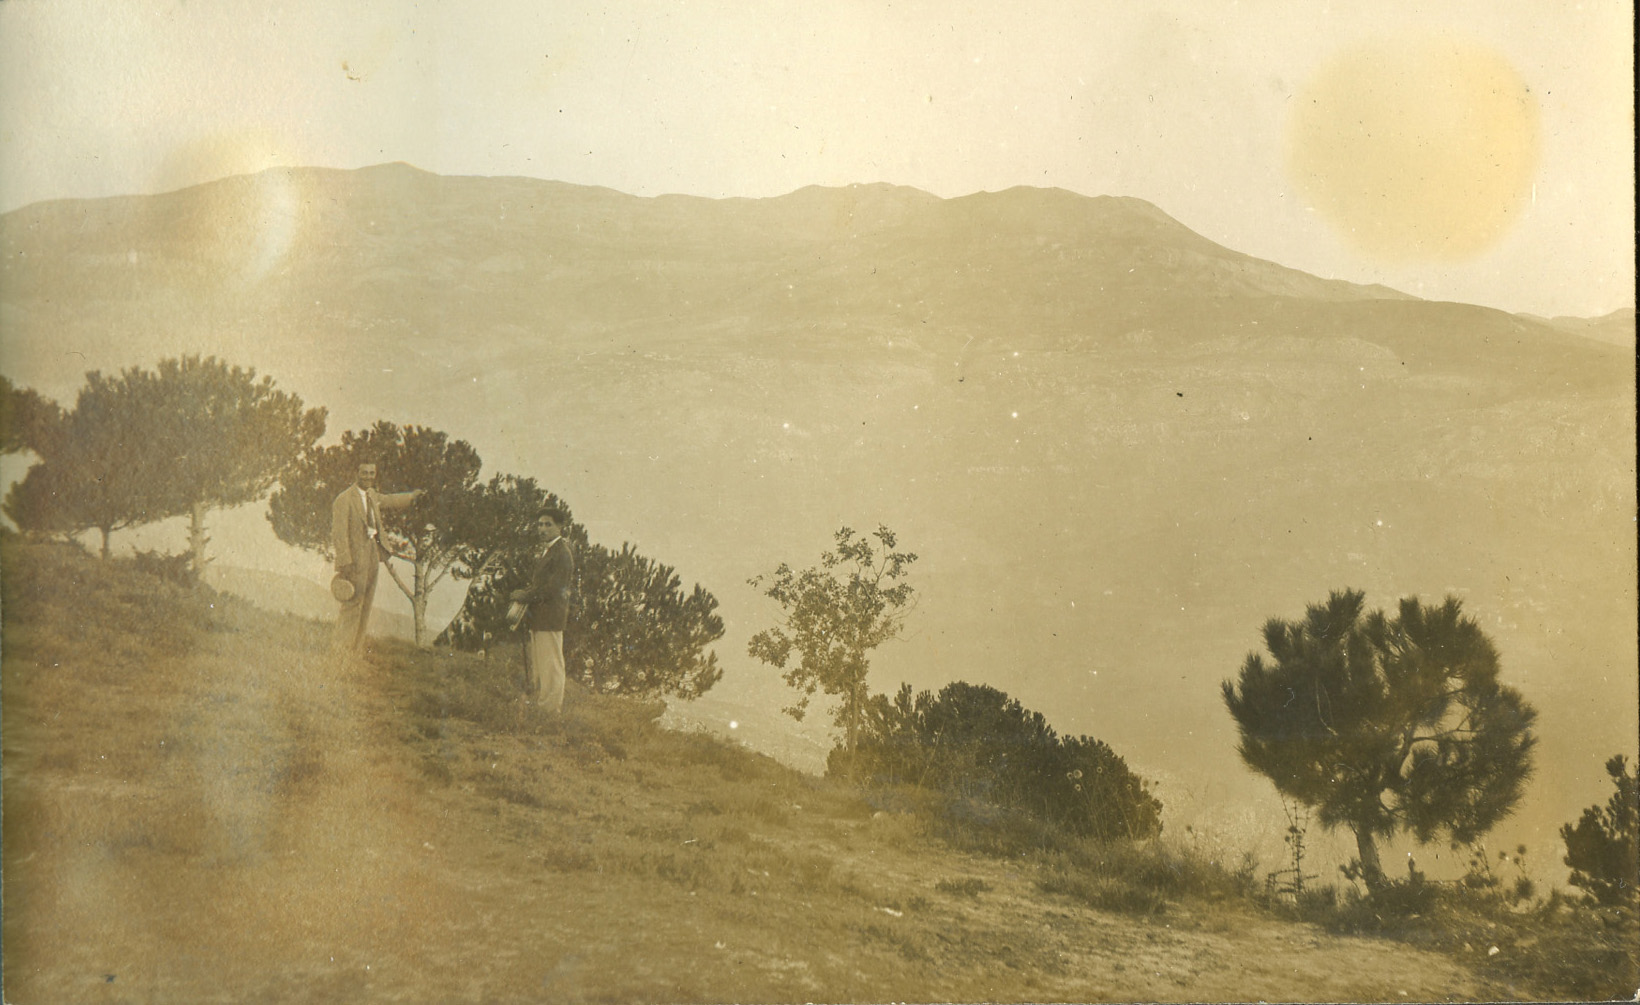 A landscape photo taken in Lebanon. Two unidentified men stand in the foreground.